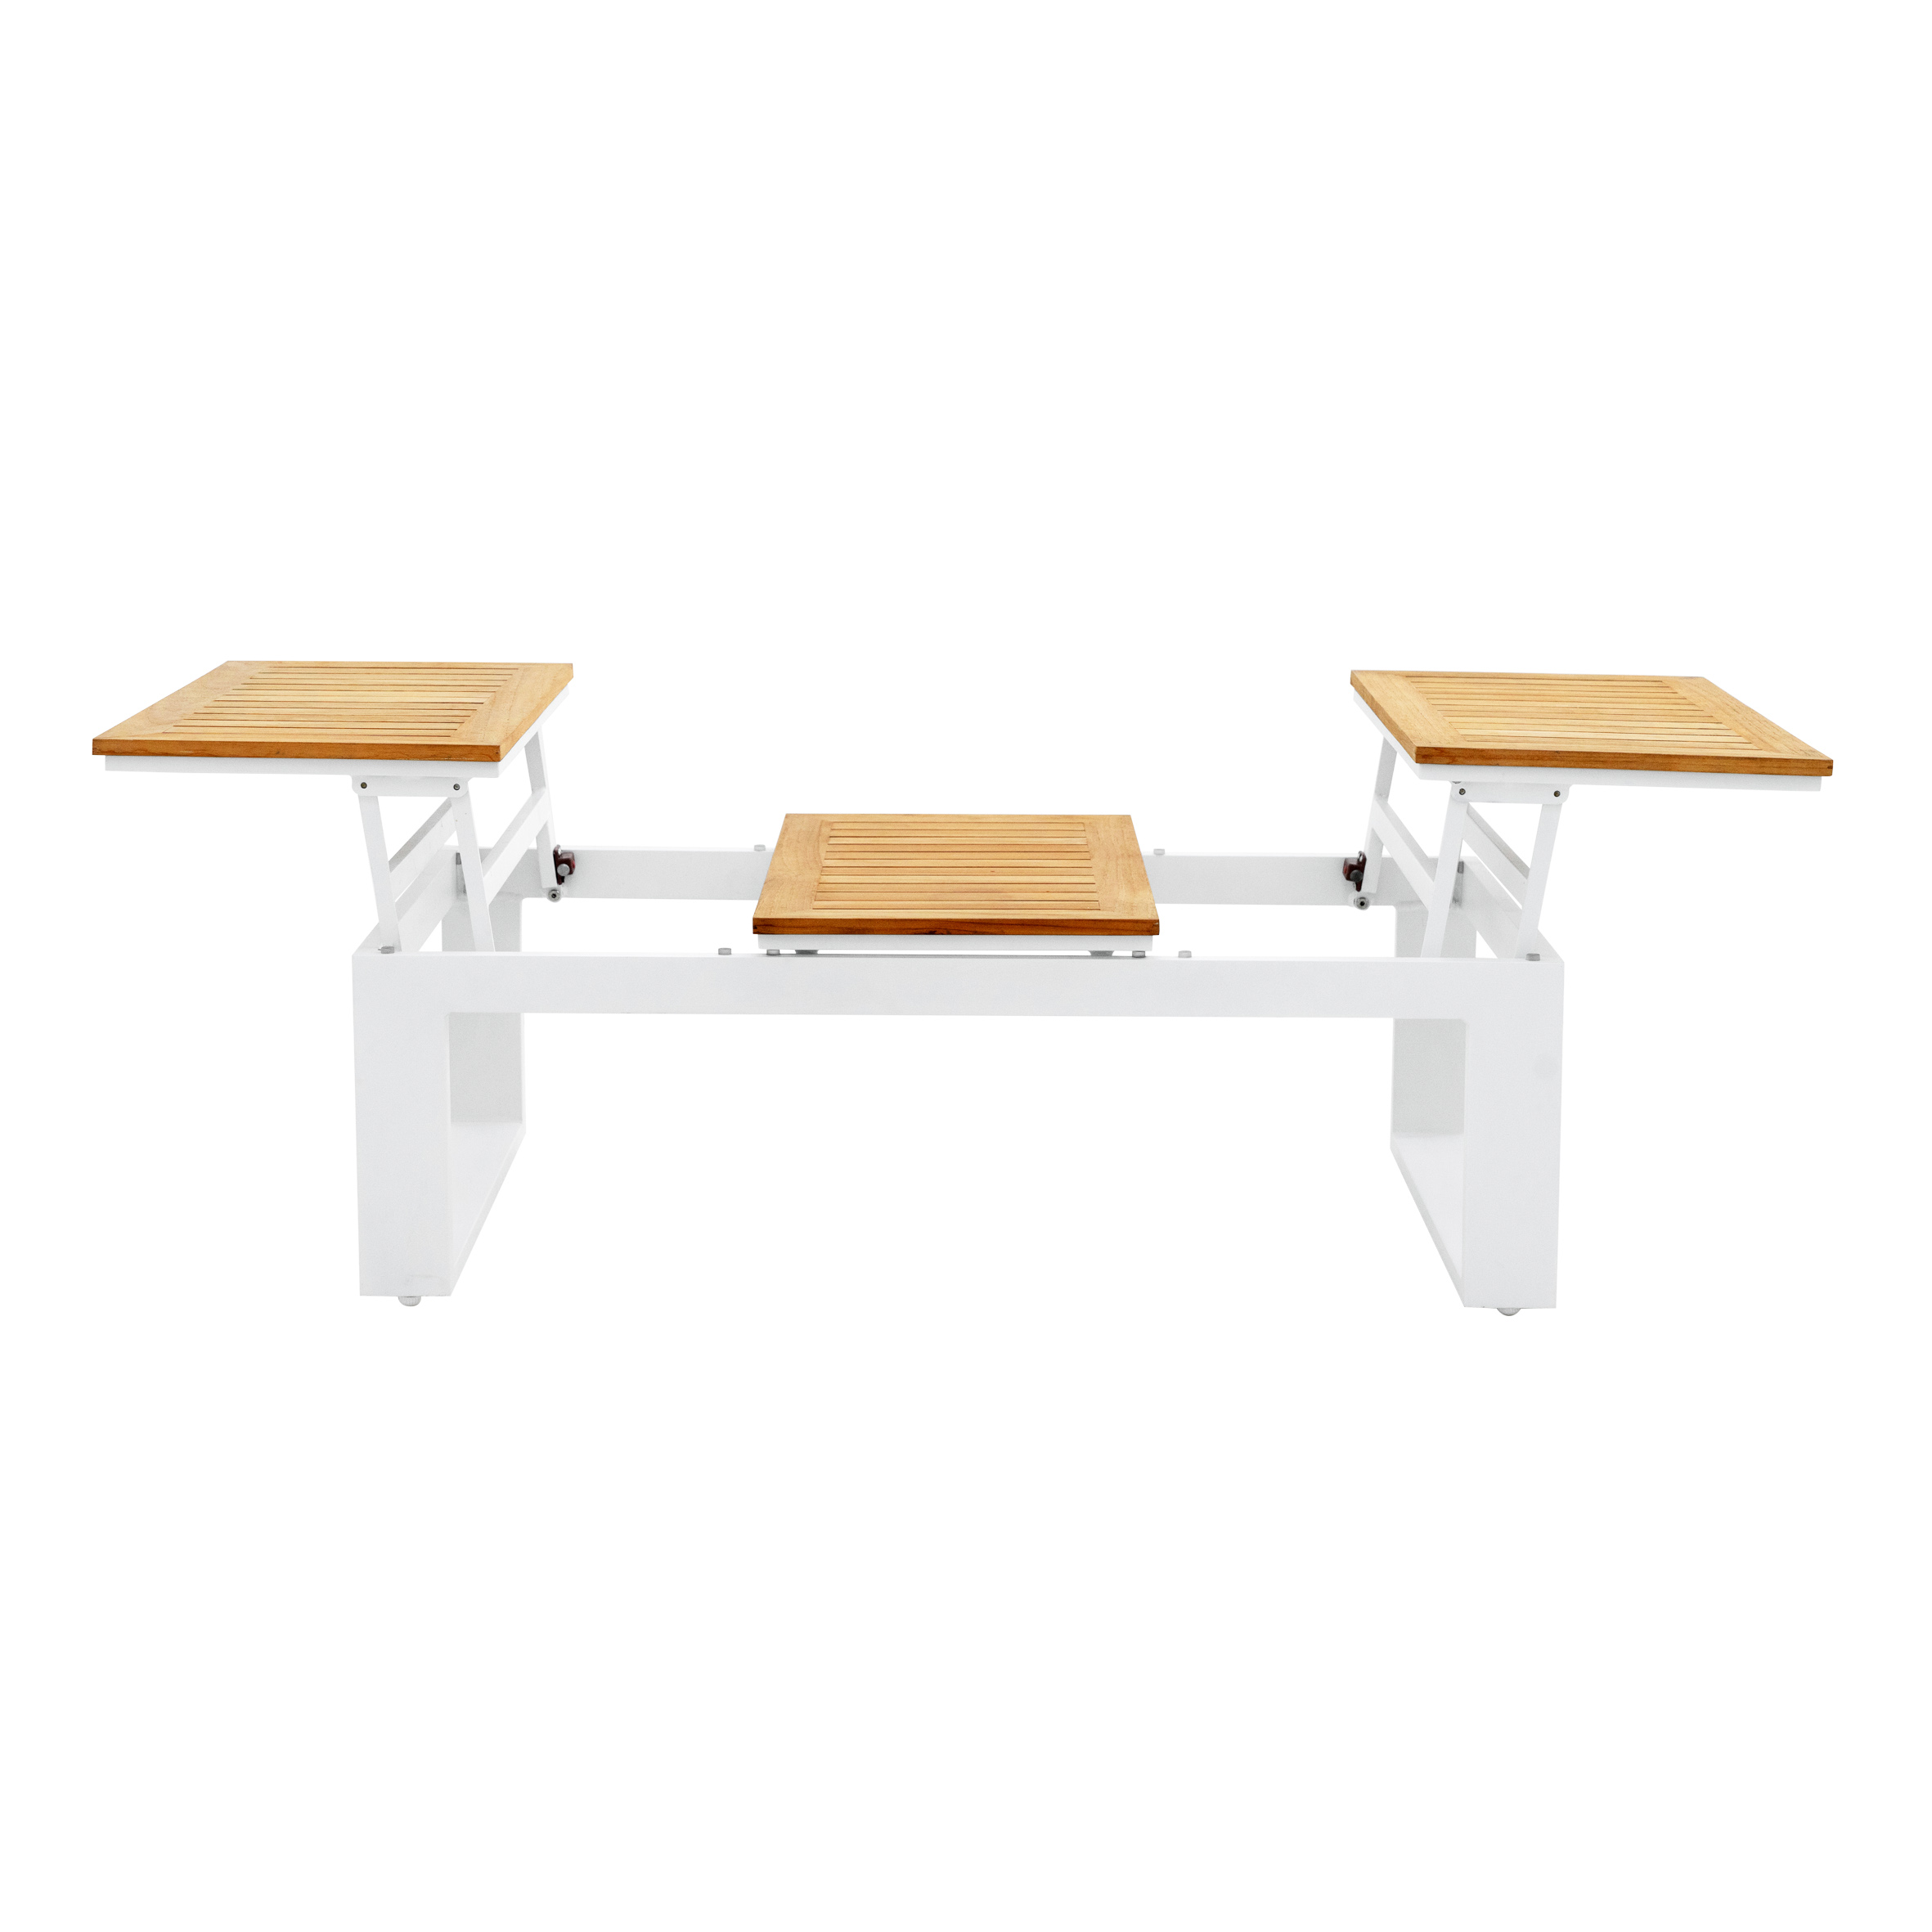 Para functional coffee table S4